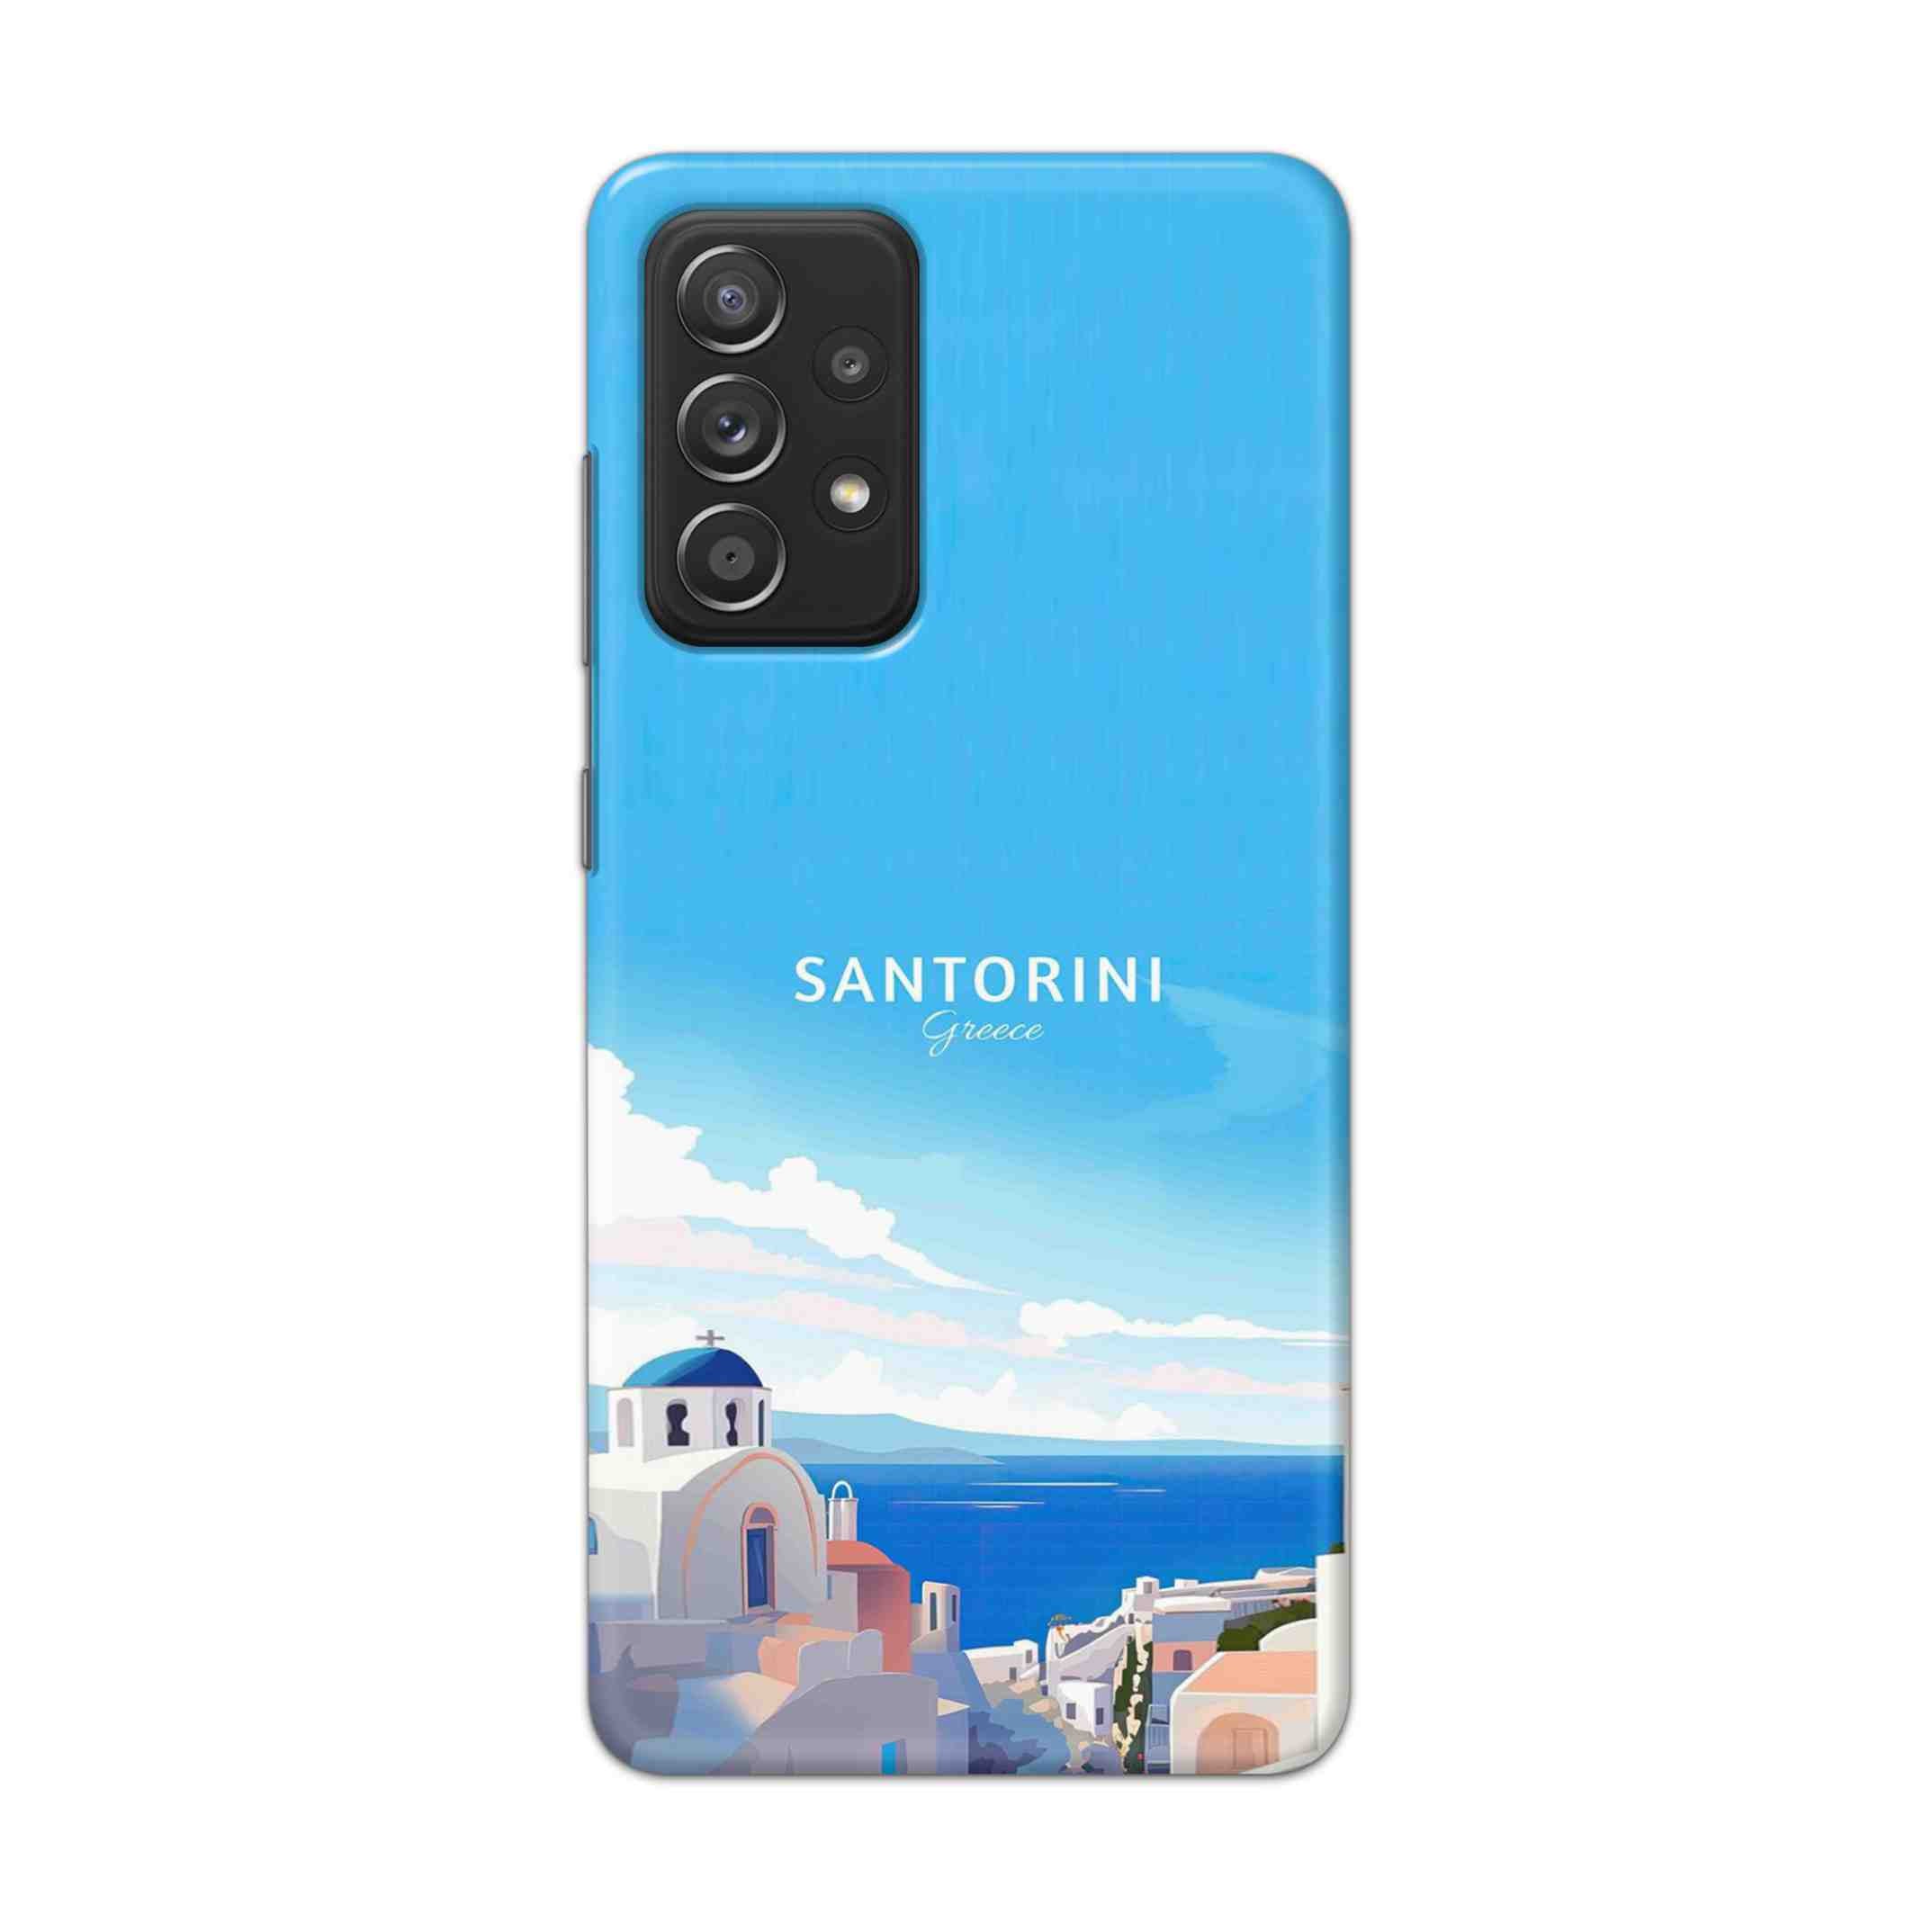 Buy Santorini Hard Back Mobile Phone Case Cover For Samsung Galaxy A52 Online